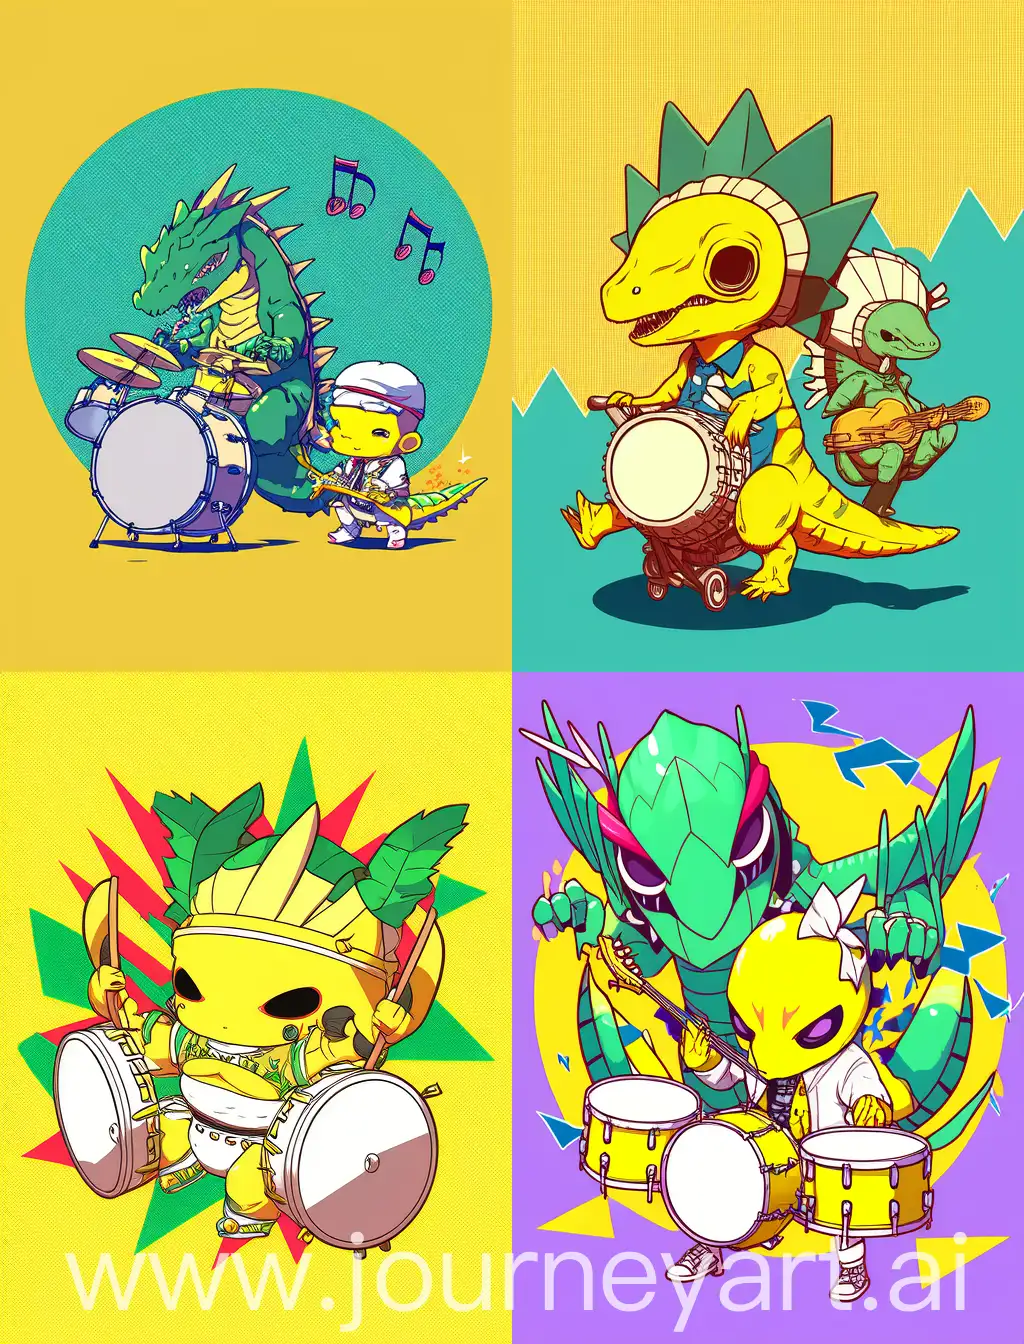 Chibi-Dinosaur-and-Anime-Guy-Drumming-Duo-on-Vibrant-Yellow-Background